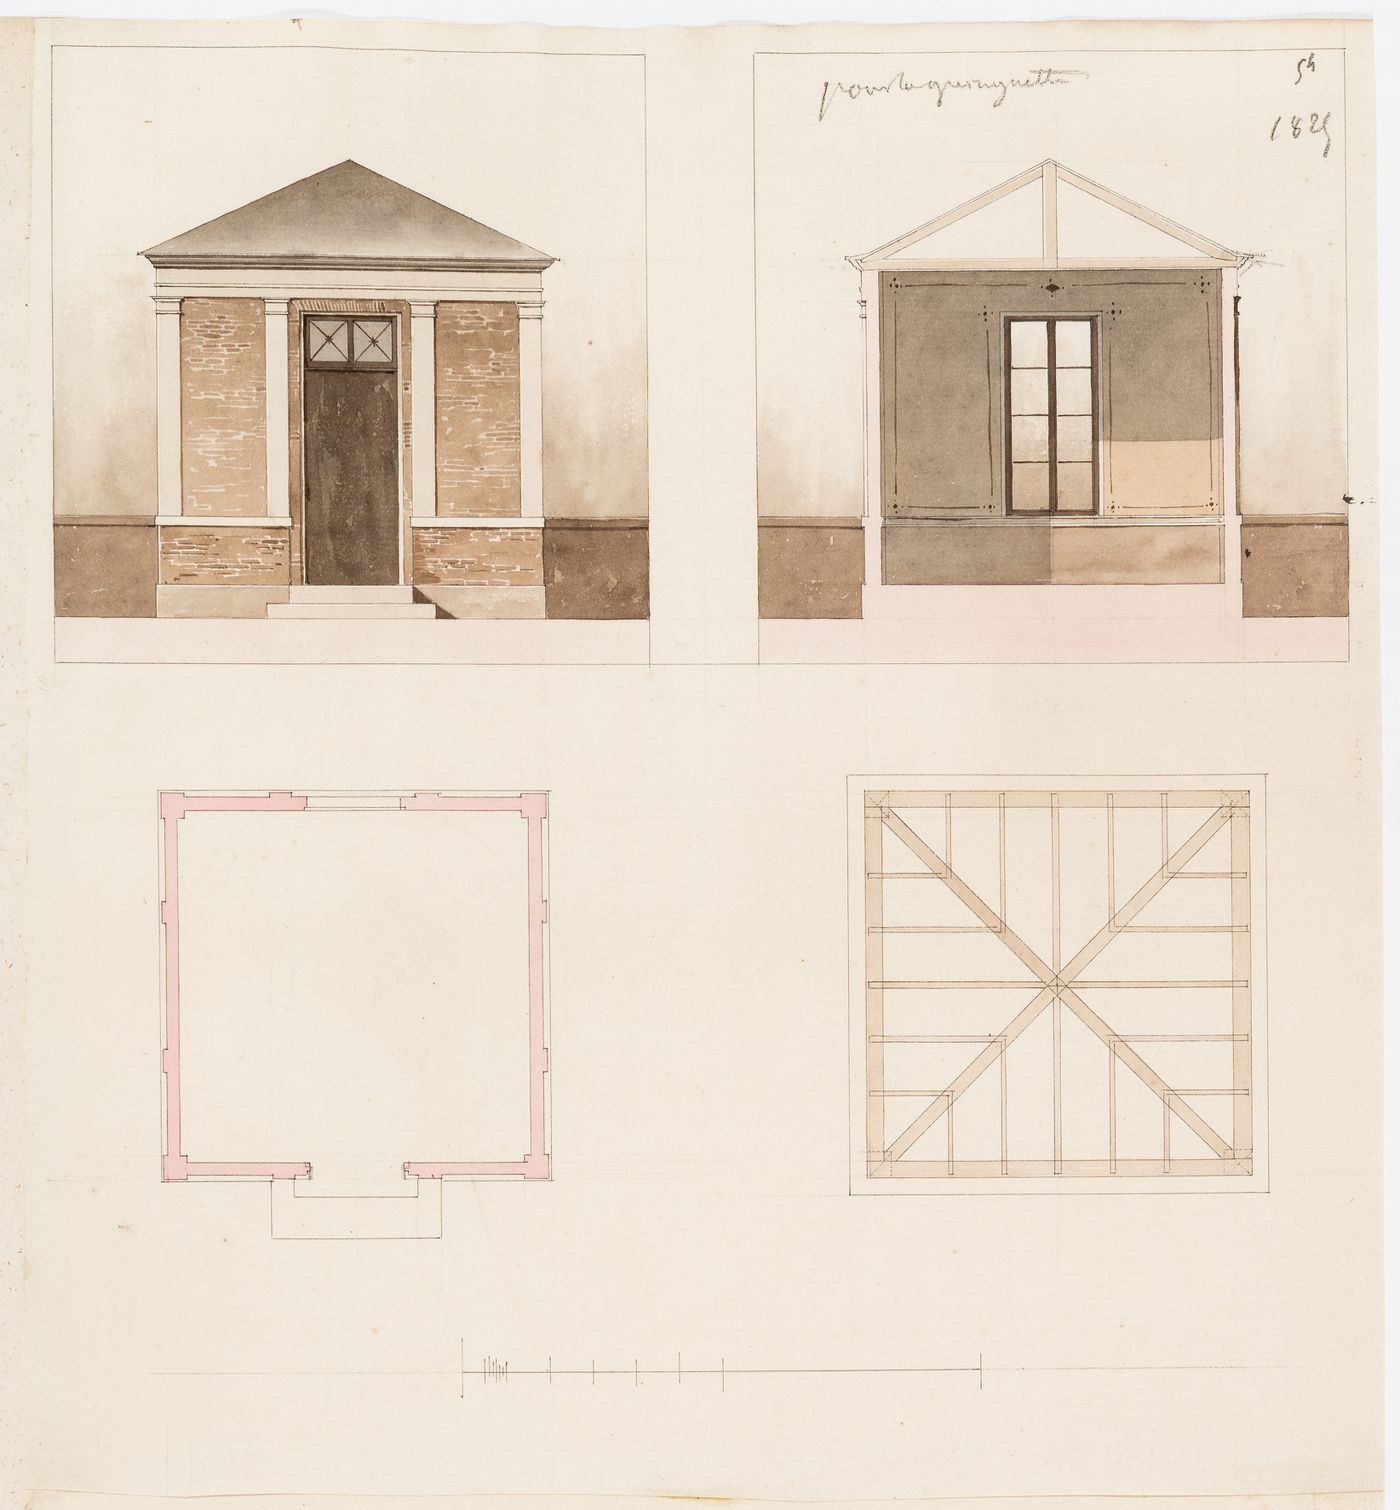 Elevation, section, and plans for the garden pavilion for a "guinguette"